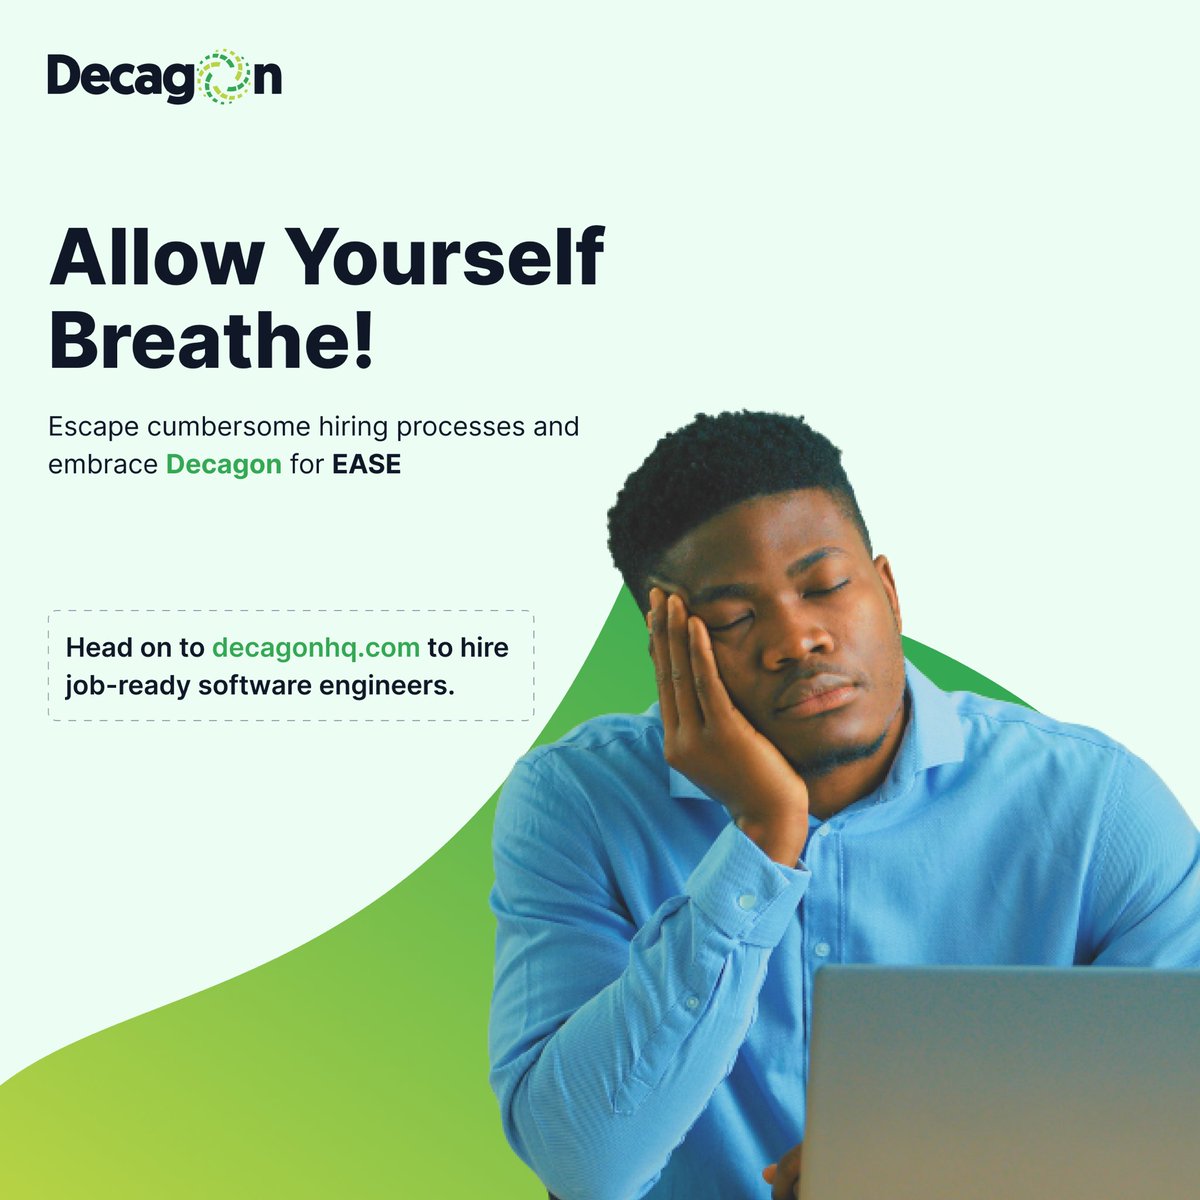 Finding and hiring developers can be overwhelming but we want you to breathheee…

Visit decagonhq.com to hire job-ready developers. 

#decagon #tech #findadeveloper #recruitement #letthepoorbreathe #product #developer #softwareengineering